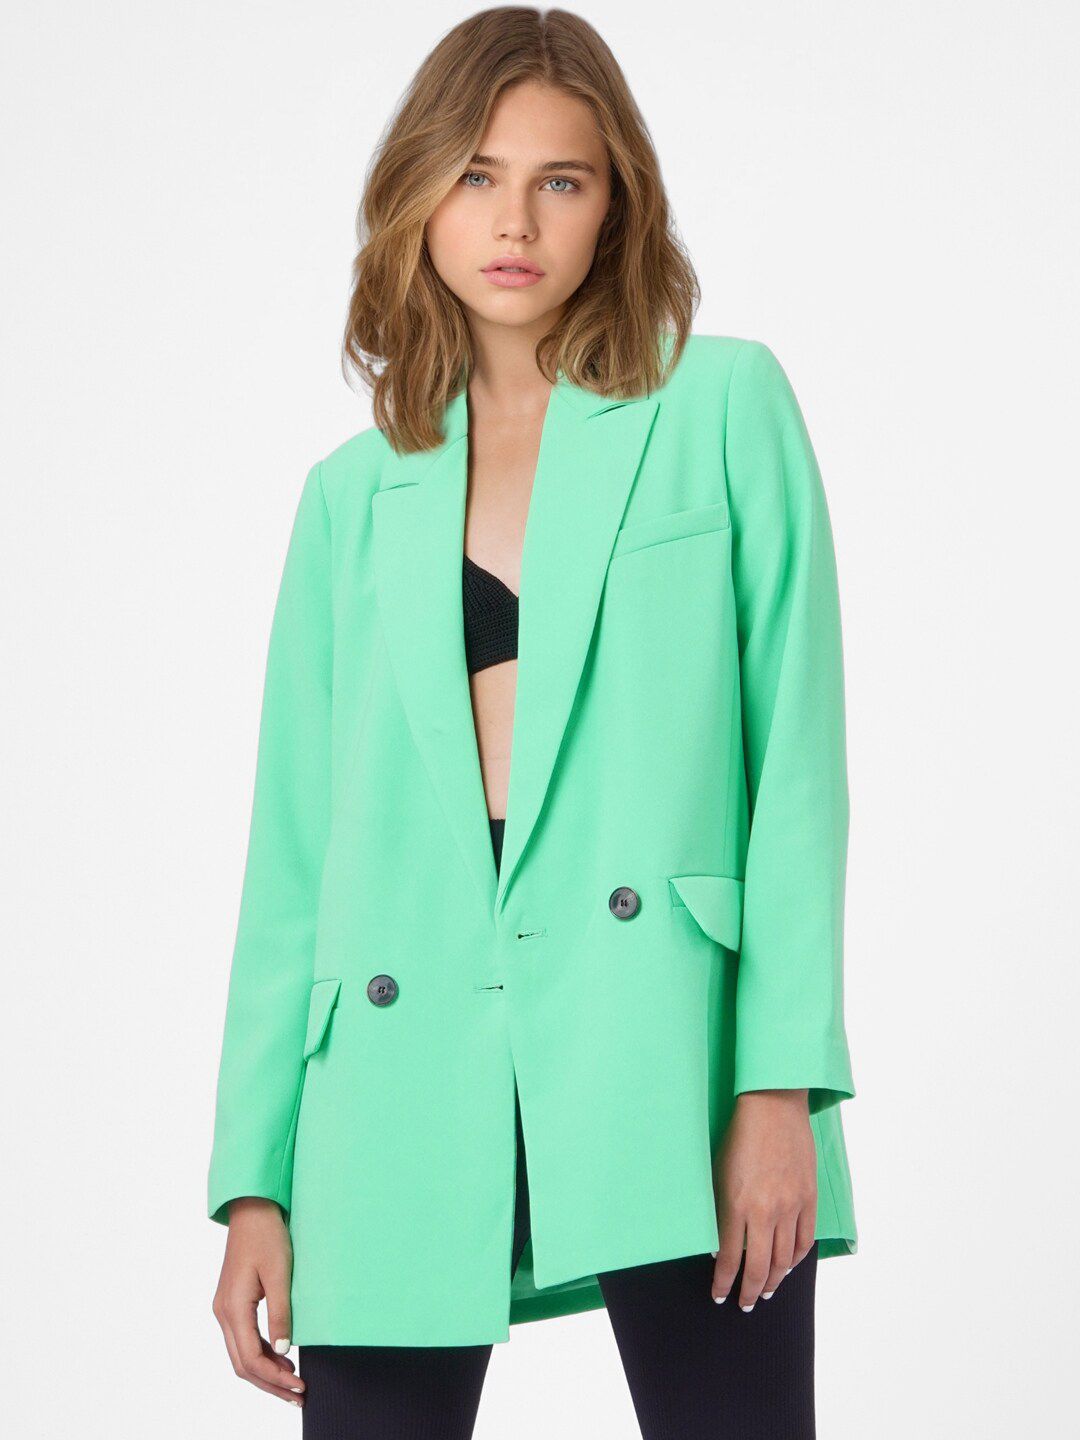 ONLY Women Green Solid Double-Breasted Formal Blazer Price in India